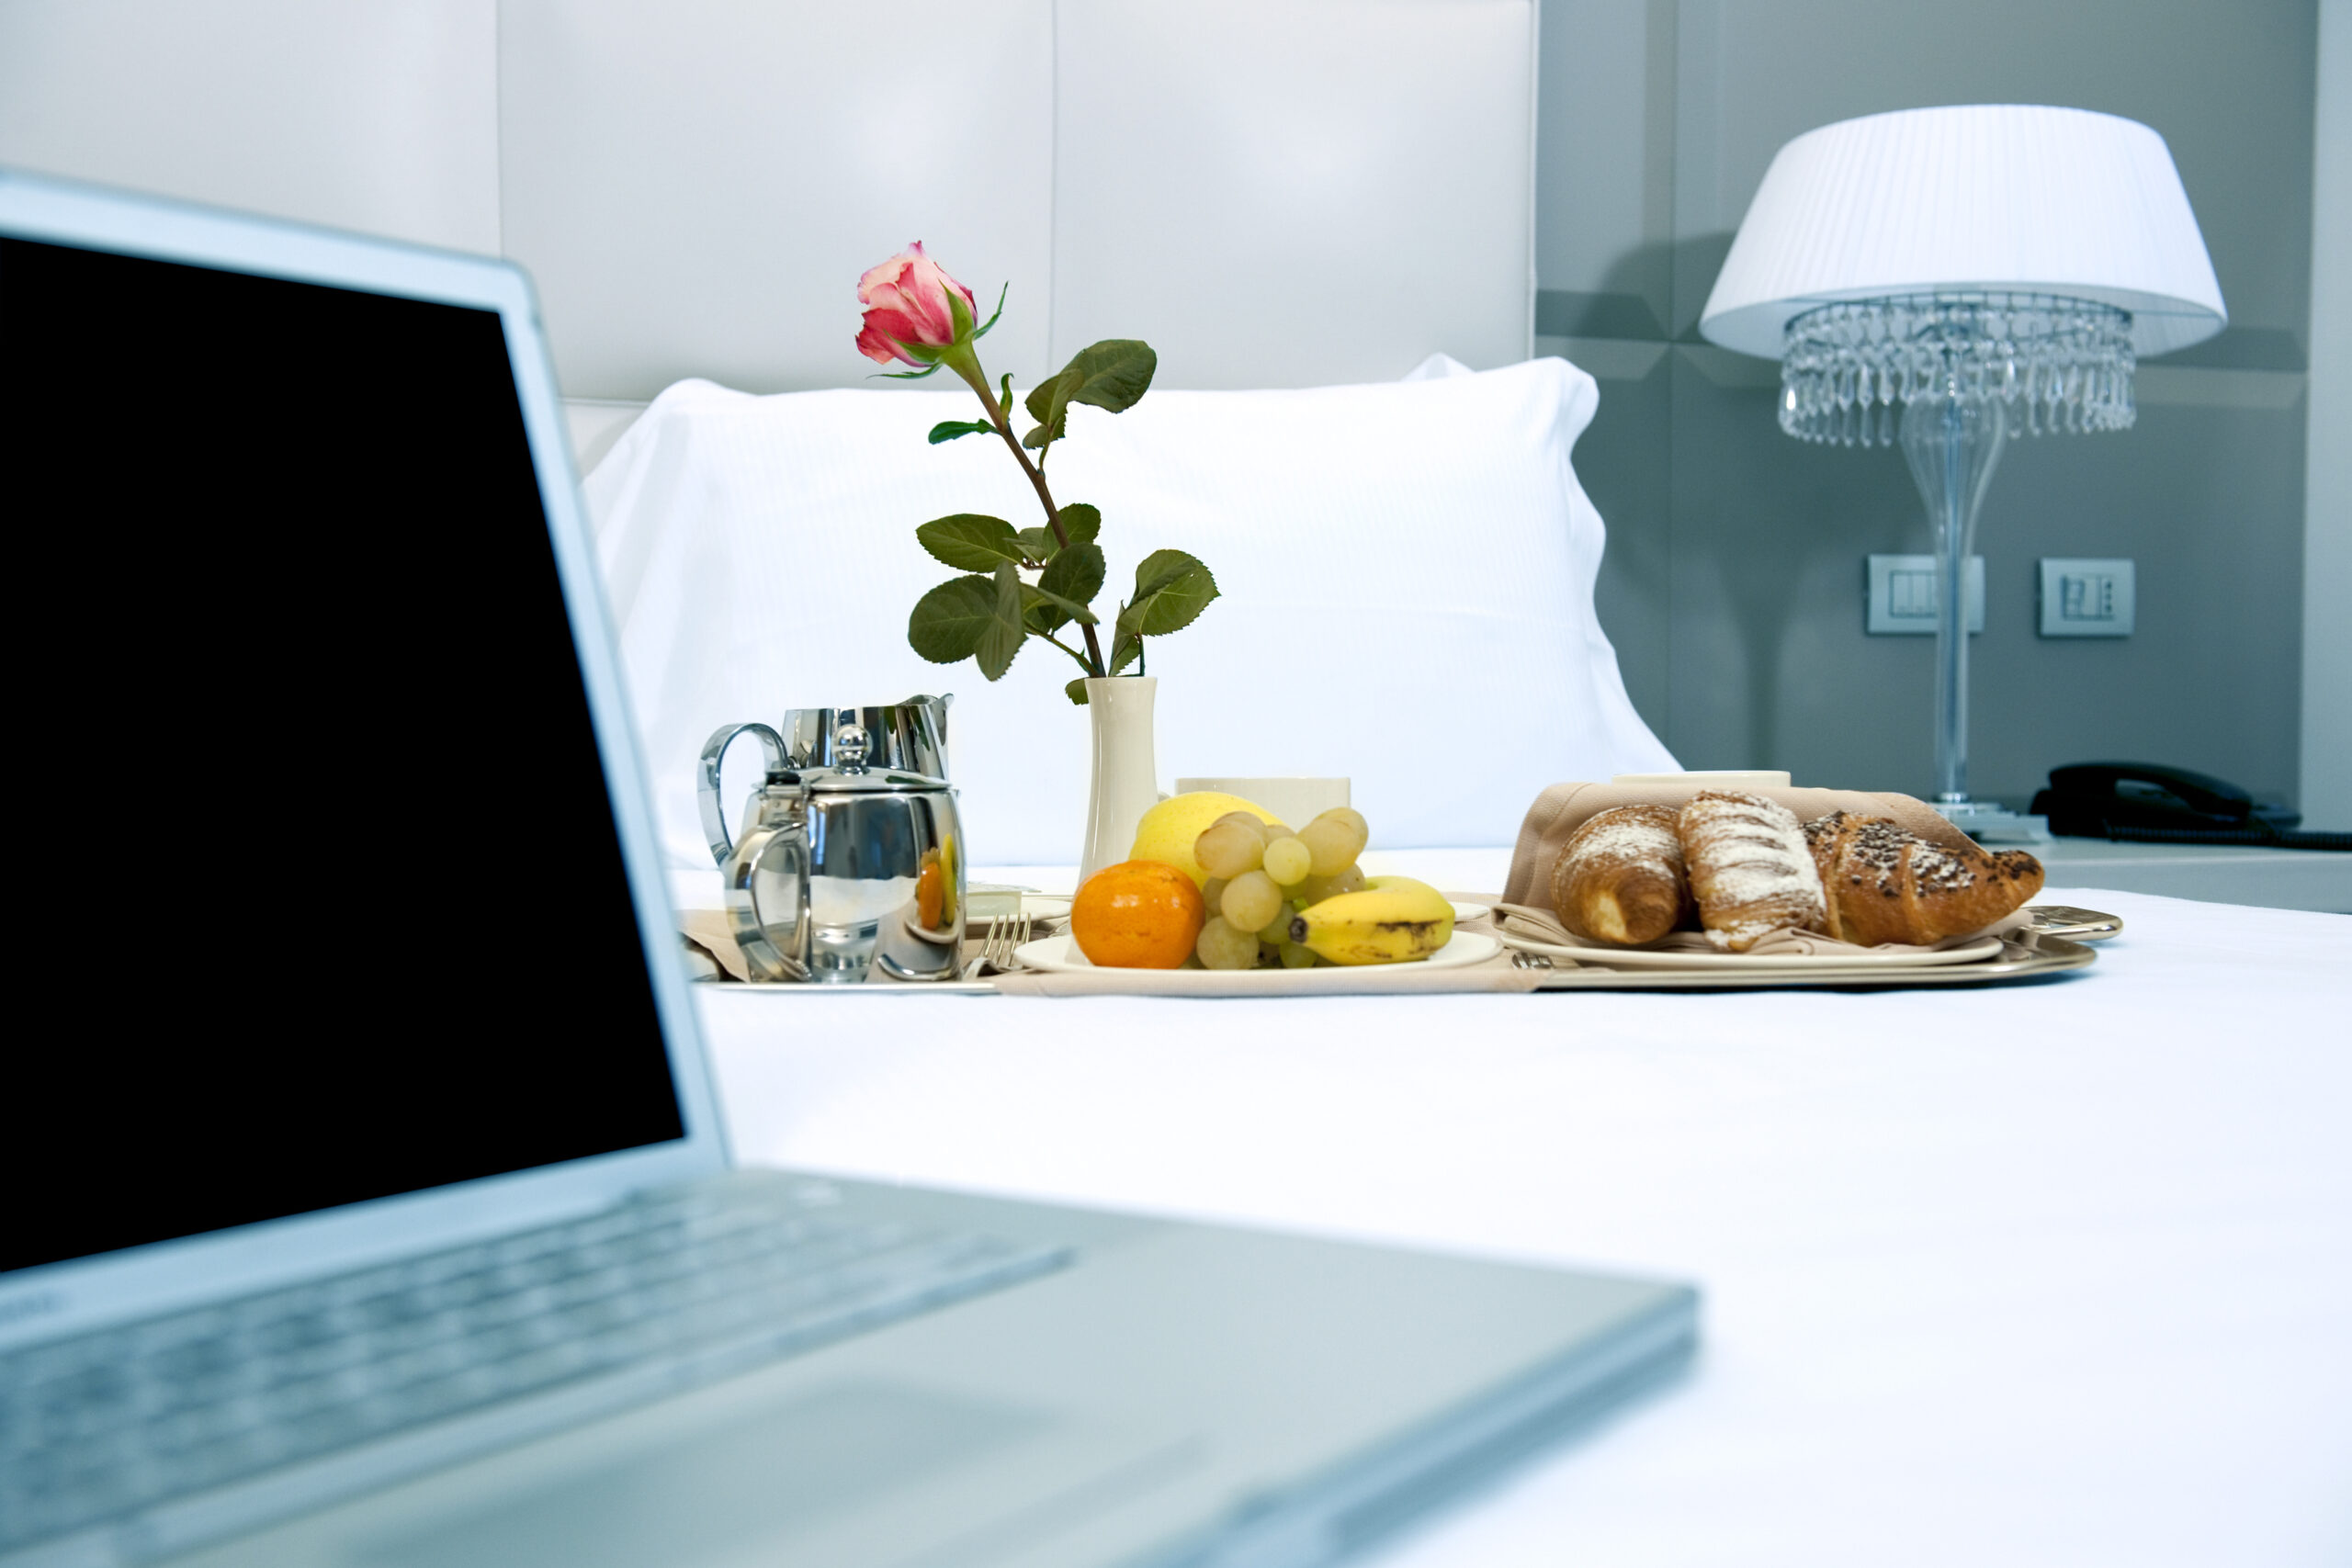 9 Ways Hotel Rooms Are Being Reimagined to Shape the Future of Guest Experience